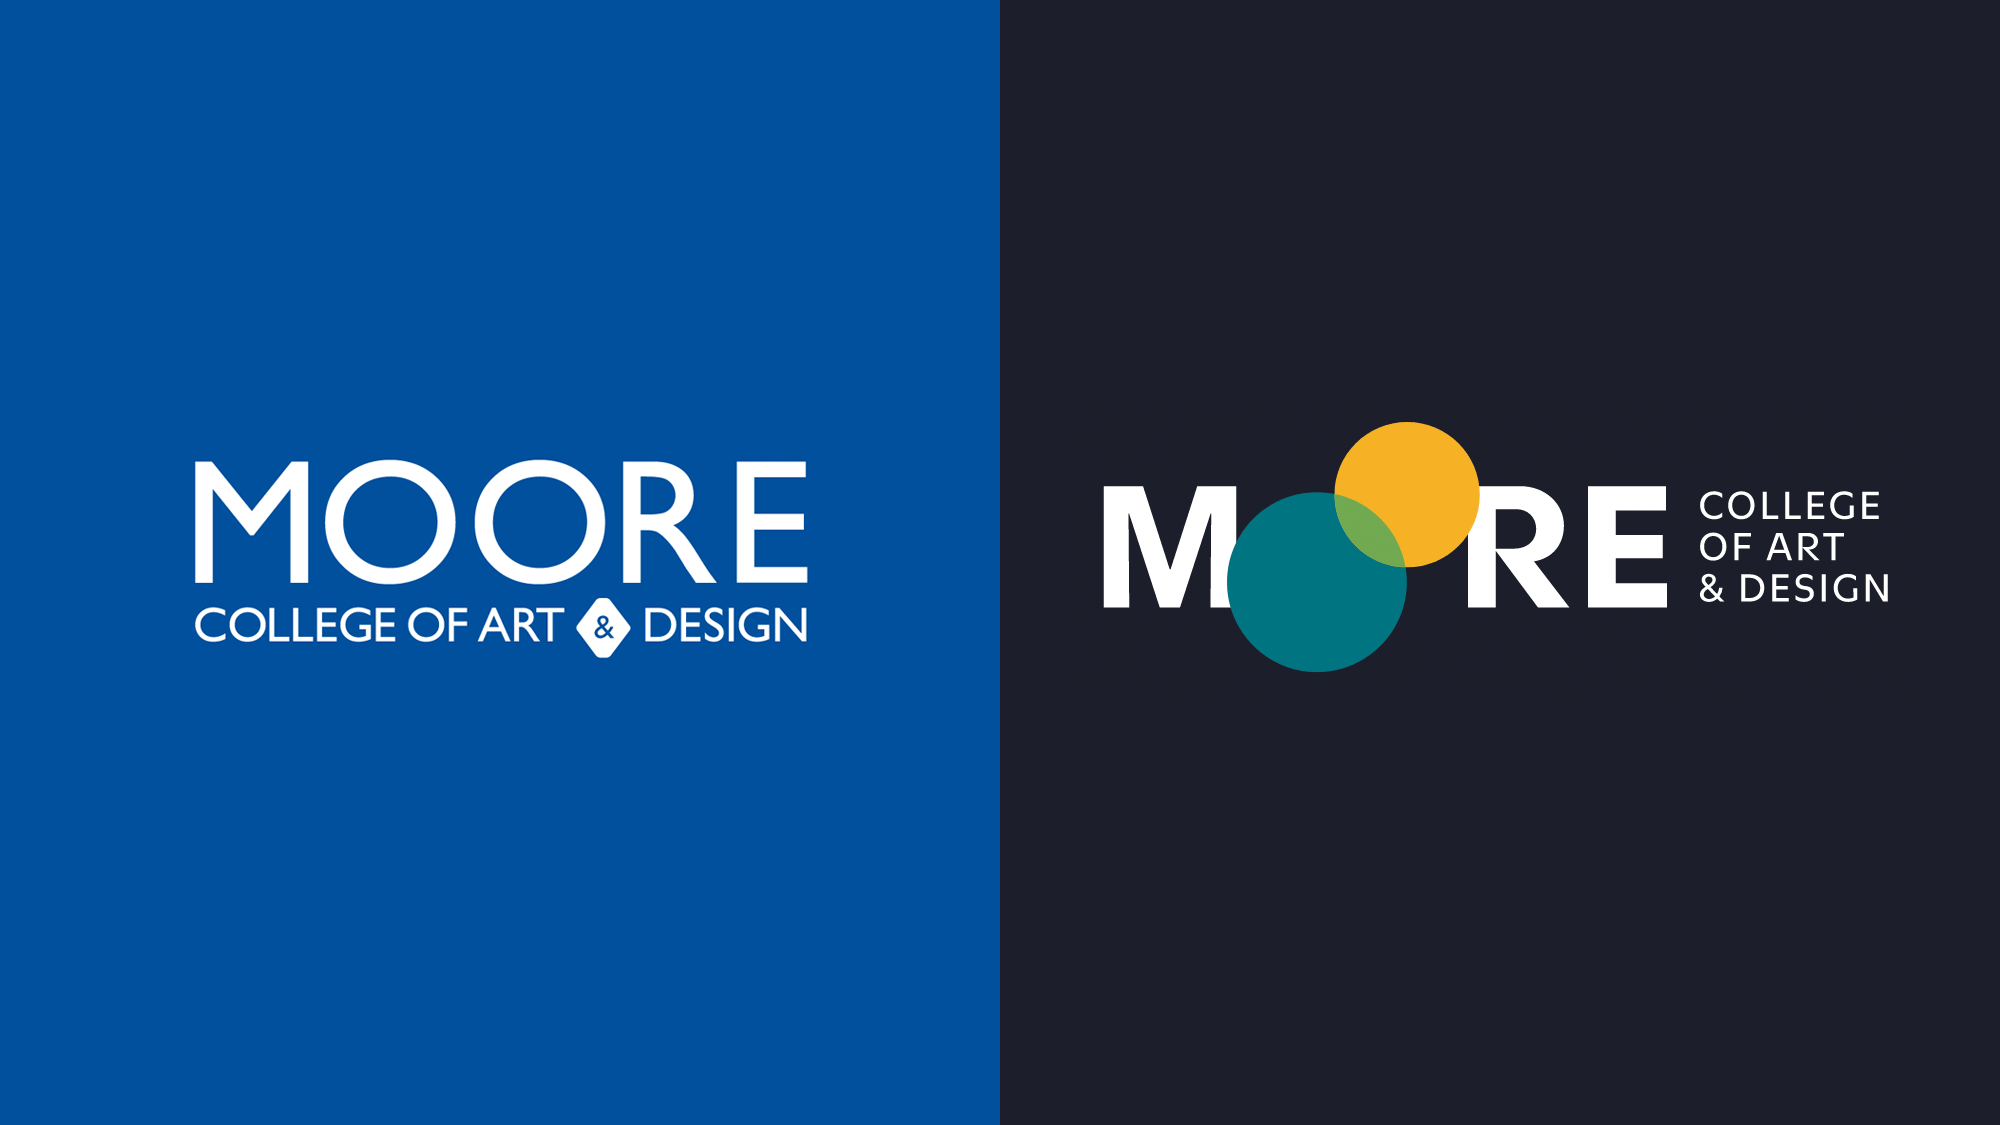 Brand New: New Logo and Identity for Moore College of Art & Design by CCA